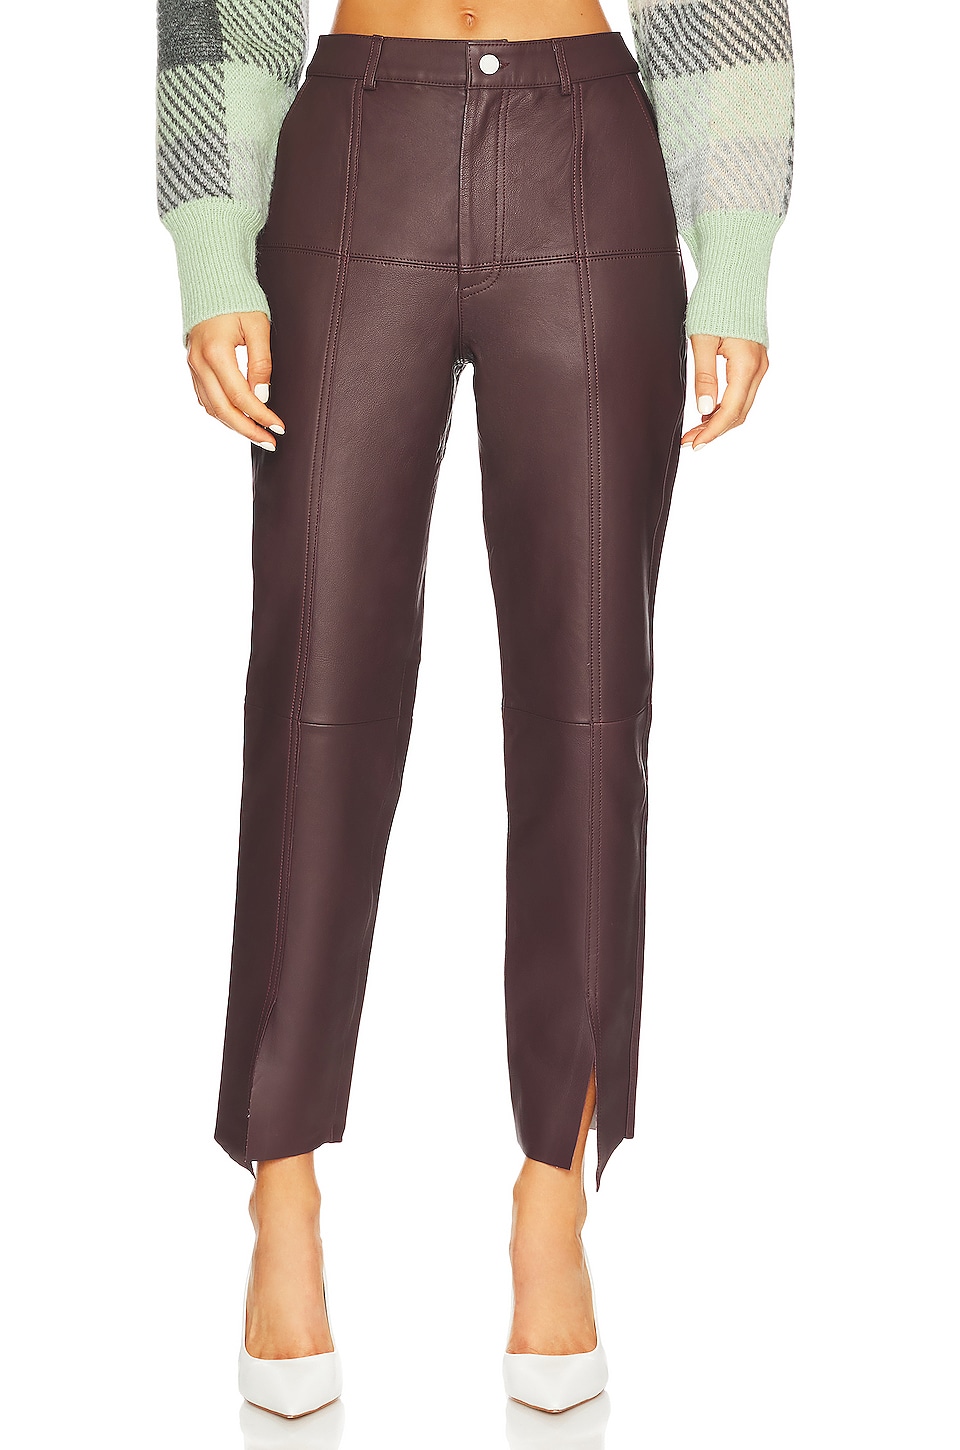 Ena Pelly Blair Seamed Leather Pant in Fig | REVOLVE